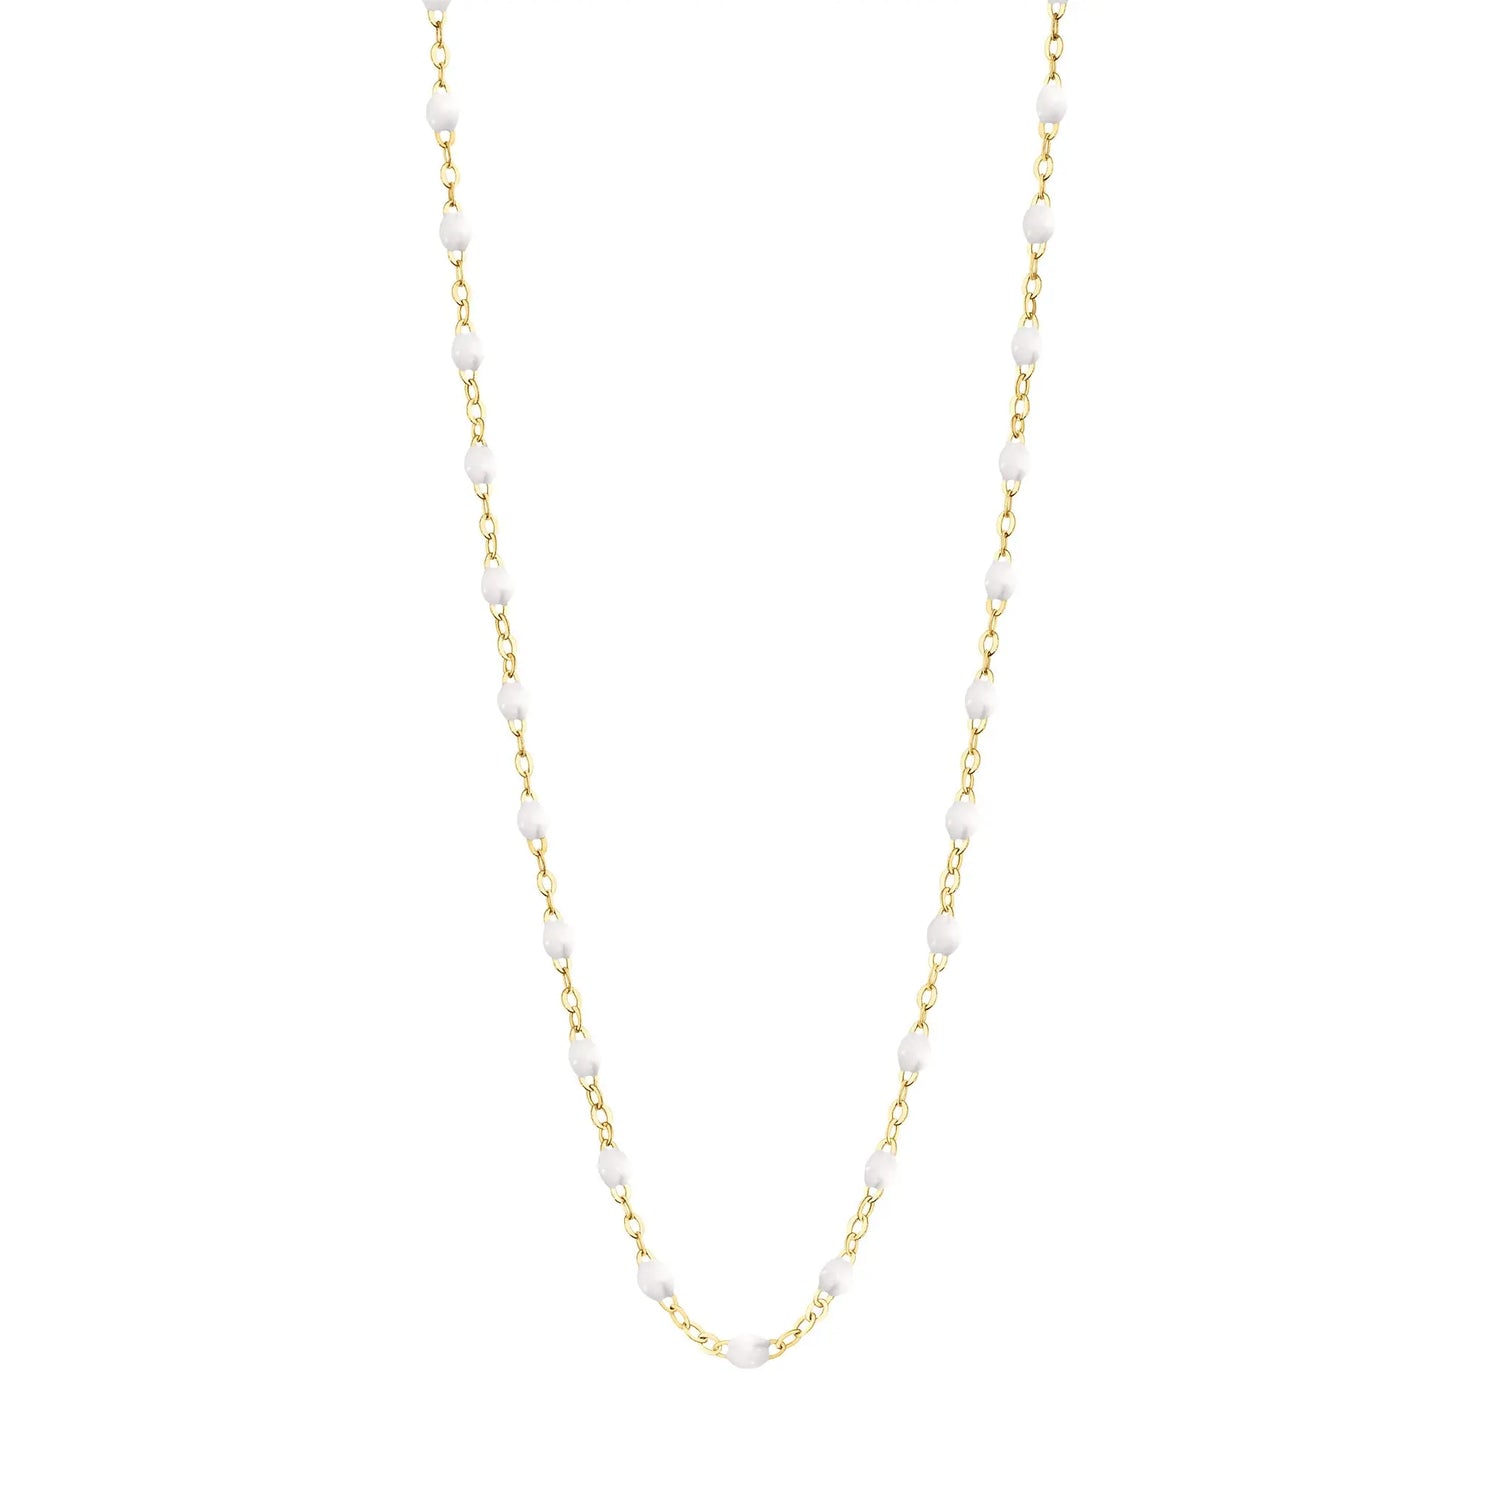 Stack you necklace layers with this versatile beaded chain! The Classic Gigi Necklace by gigi CLOZEAU features 18 carat yellow gold, and striking White resin jewels for an everyday effortless appearance. Handcrafted in 18k yellow gold. The beads measure 1.50mm in diameter and is finished with a spring ring clasp. The length is 19.7 inches.  Each jewel is unique, artisanally made in France in it's family-owned workshop.